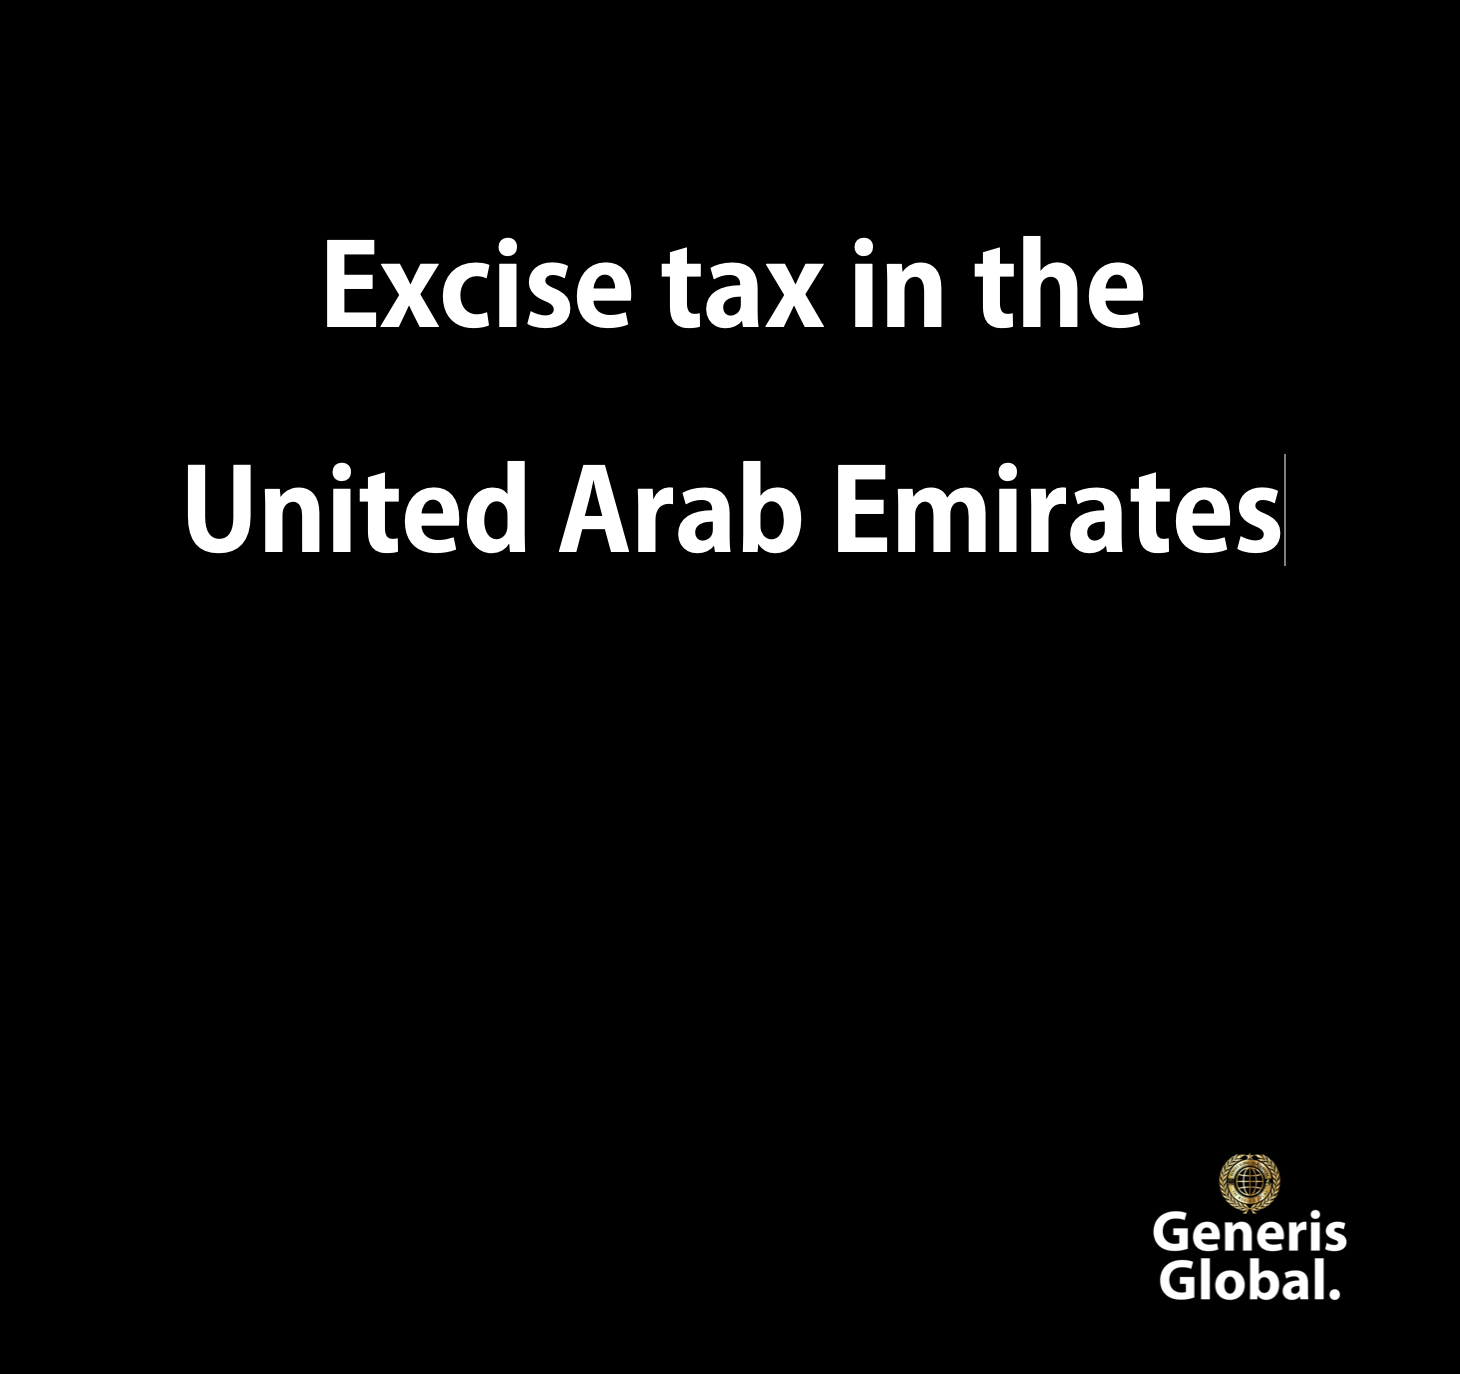 Excise tax in the United Arab Emirates